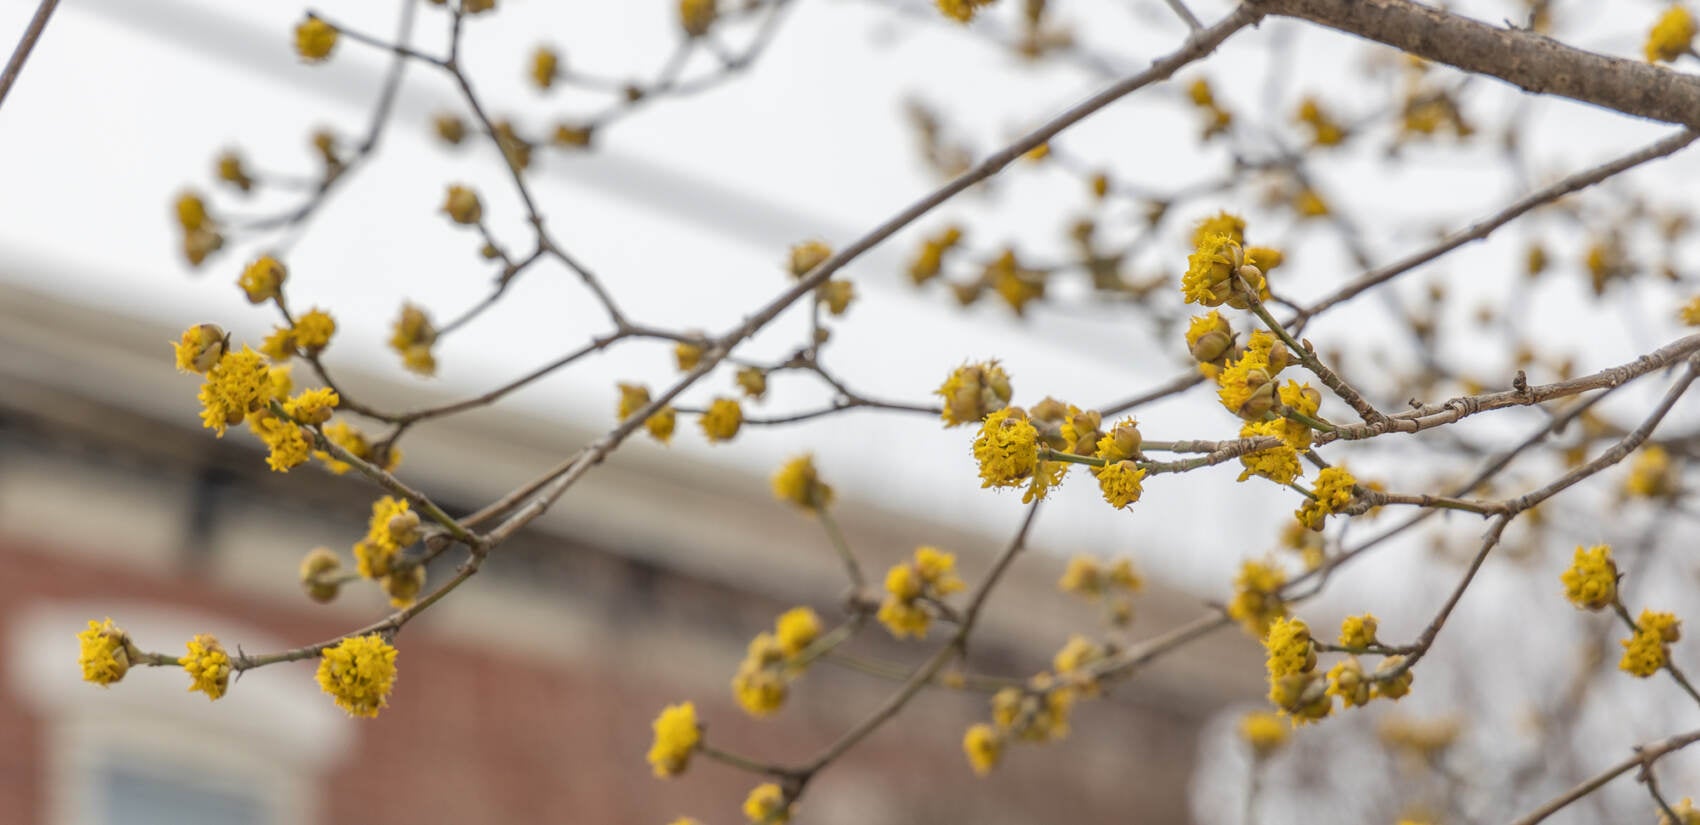 A cornelian dogwood tree puts out its first burst of bloom in Port Richmond. (Kimberly Paynter/WHYY)